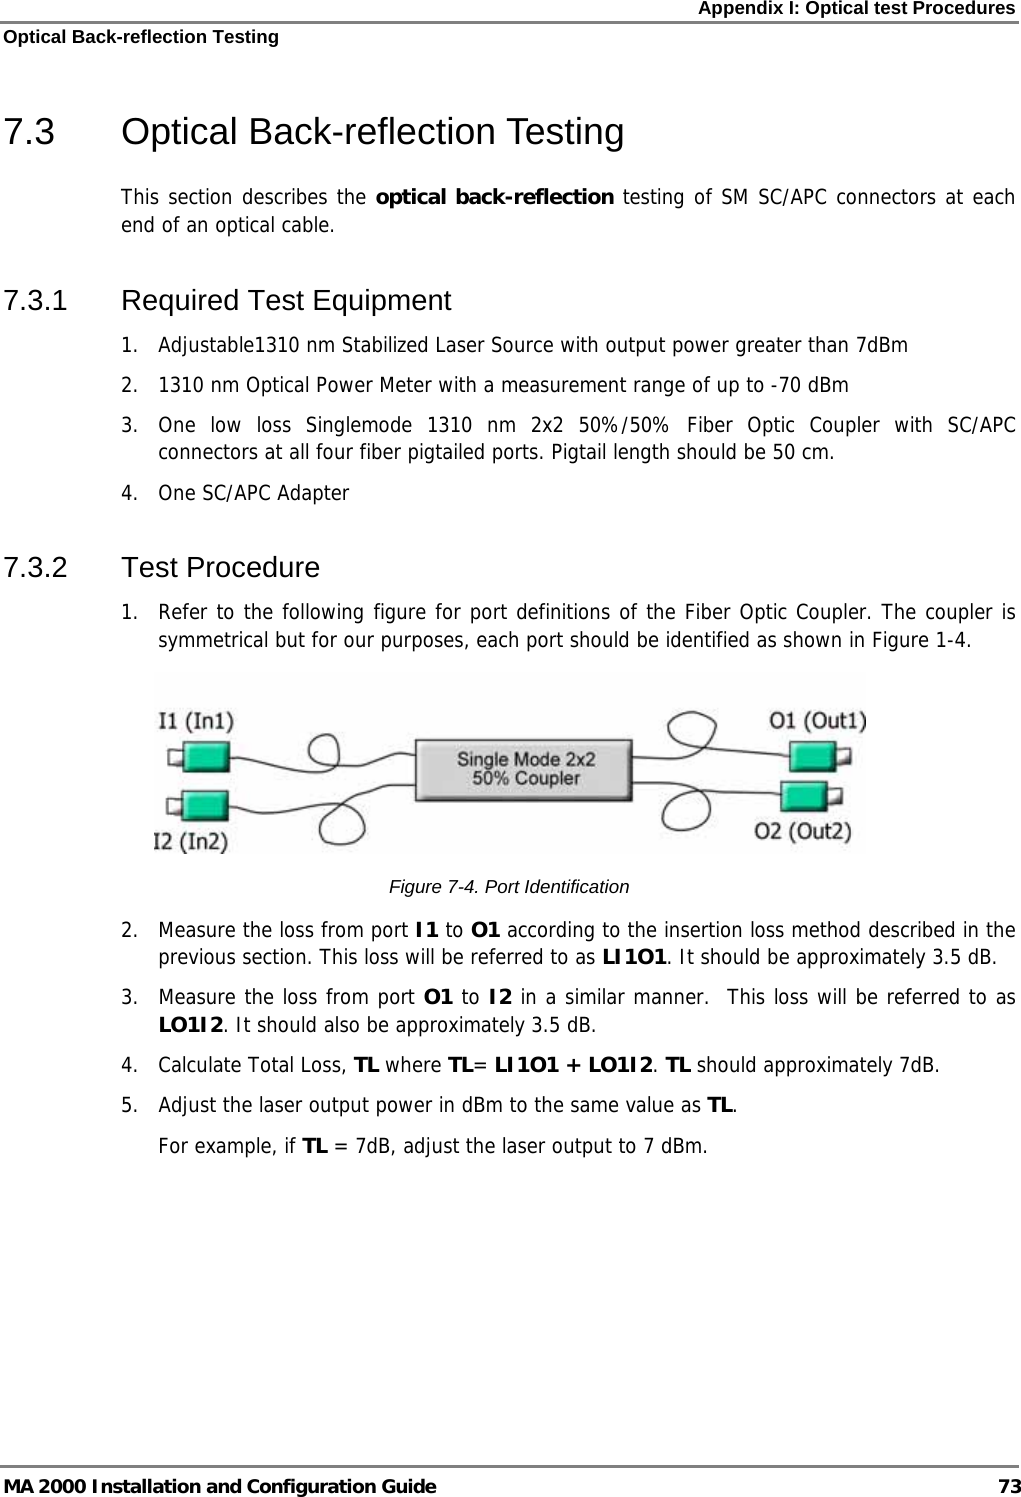 Appendix I: Optical test Procedures Optical Back-reflection Testing MA 2000 Installation and Configuration Guide  73 7.3 Optical Back-reflection Testing This section describes the optical back-reflection testing of SM SC/APC connectors at each end of an optical cable. 7.3.1 Required Test Equipment 1.  Adjustable1310 nm Stabilized Laser Source with output power greater than 7dBm 2.  1310 nm Optical Power Meter with a measurement range of up to -70 dBm 3.  One low loss Singlemode 1310 nm 2x2 50%/50% Fiber Optic Coupler with SC/APC connectors at all four fiber pigtailed ports. Pigtail length should be 50 cm. 4. One SC/APC Adapter 7.3.2 Test Procedure 1.  Refer to the following figure for port definitions of the Fiber Optic Coupler. The coupler is symmetrical but for our purposes, each port should be identified as shown in Figure 1-4.  Figure  7-4. Port Identification 2.  Measure the loss from port I1 to O1 according to the insertion loss method described in the previous section. This loss will be referred to as LI1O1. It should be approximately 3.5 dB.  3.  Measure the loss from port O1 to I2 in a similar manner.  This loss will be referred to as LO1I2. It should also be approximately 3.5 dB.  4. Calculate Total Loss, TL where TL= LI1O1 + LO1I2. TL should approximately 7dB. 5.  Adjust the laser output power in dBm to the same value as TL.  For example, if TL = 7dB, adjust the laser output to 7 dBm. 